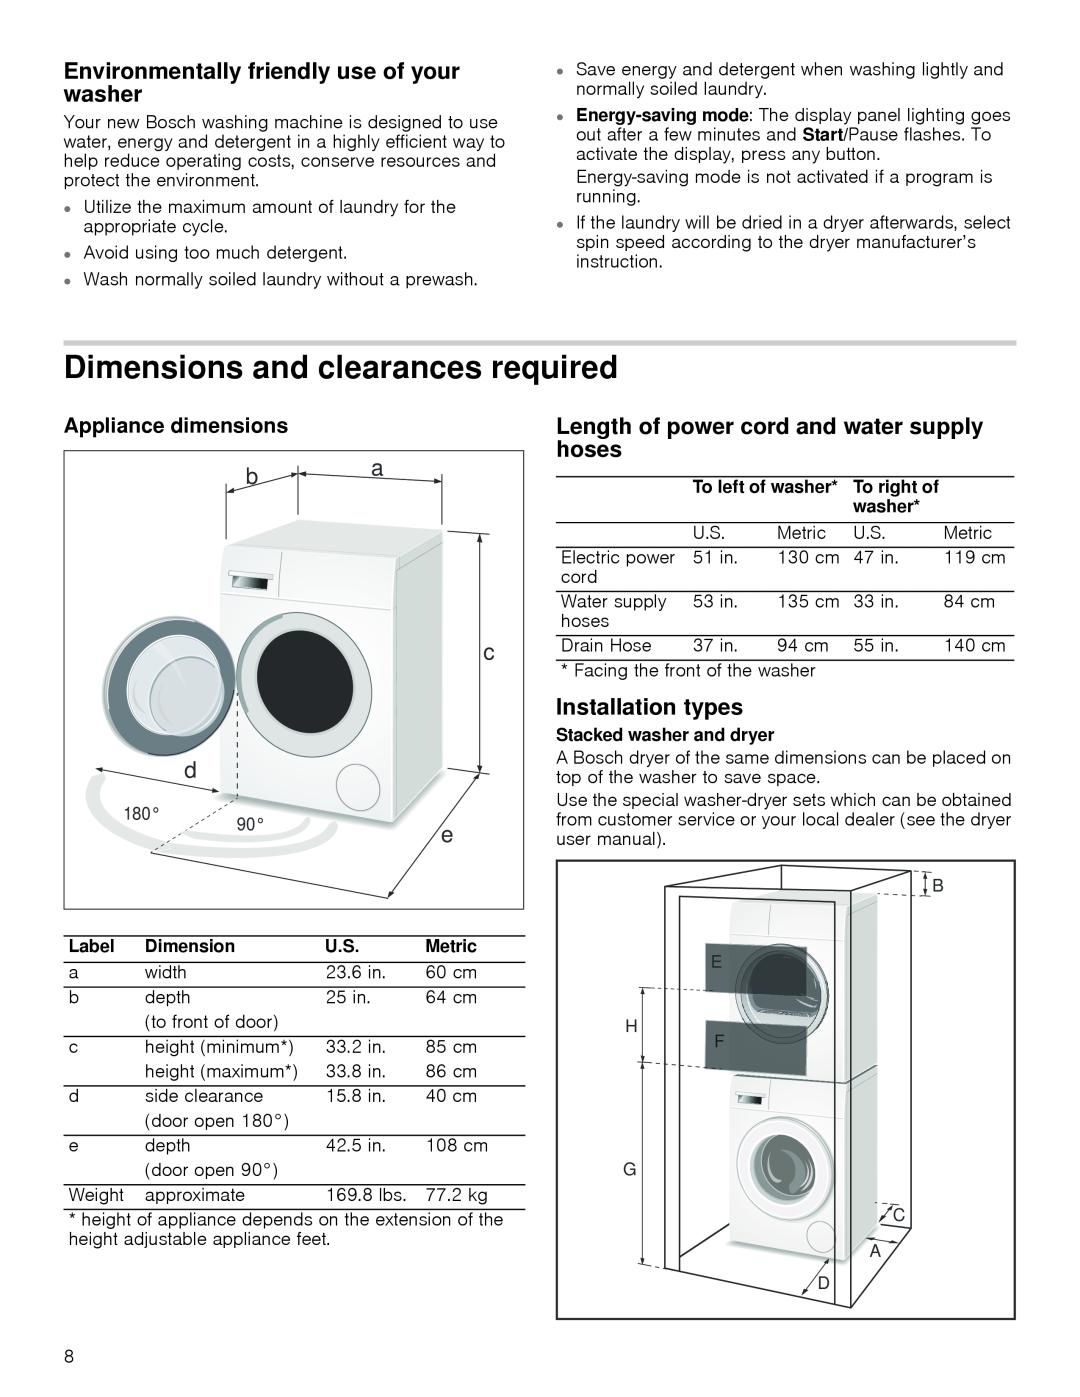 Bosch Appliances WAP24201UC Dimensions and clearances required, Environmentally friendly use of your washer, Label, Metric 